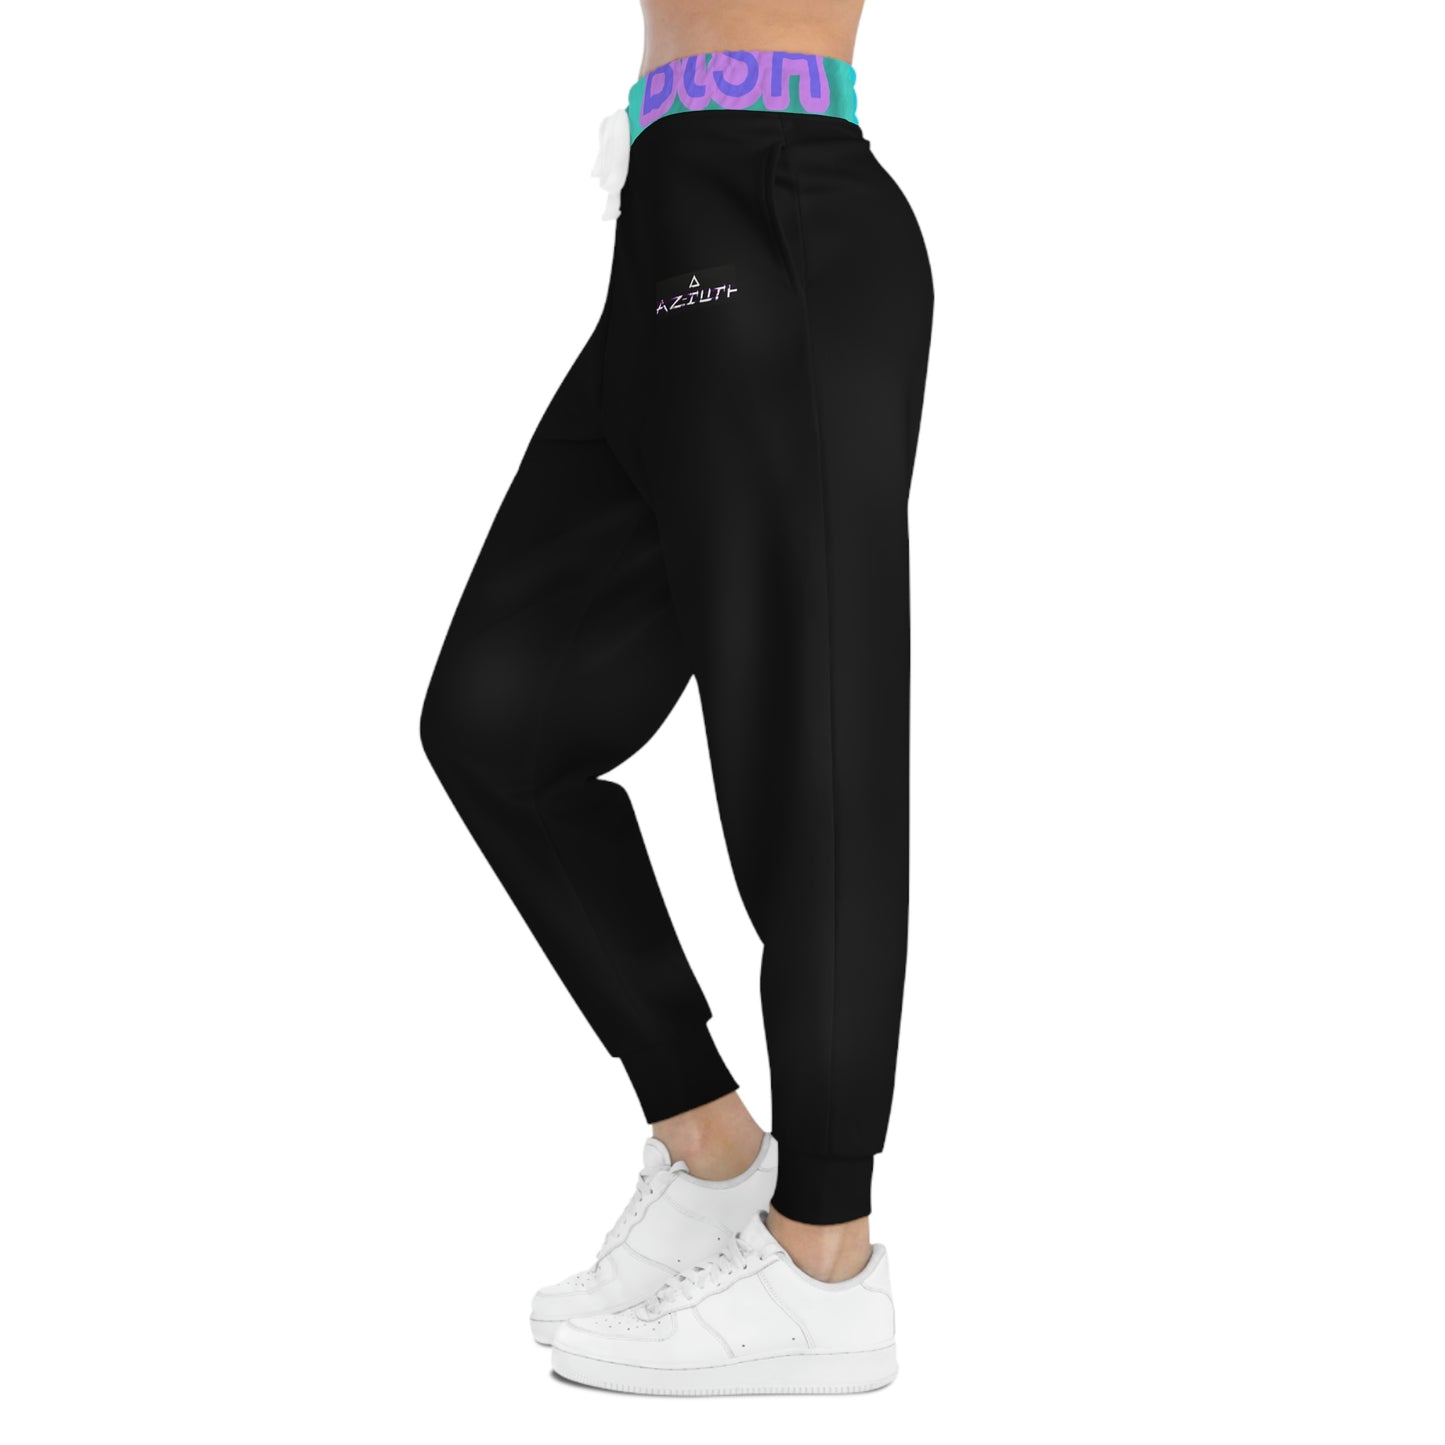 Atziluth Gallery "Cyber Bish" Womens Joggers